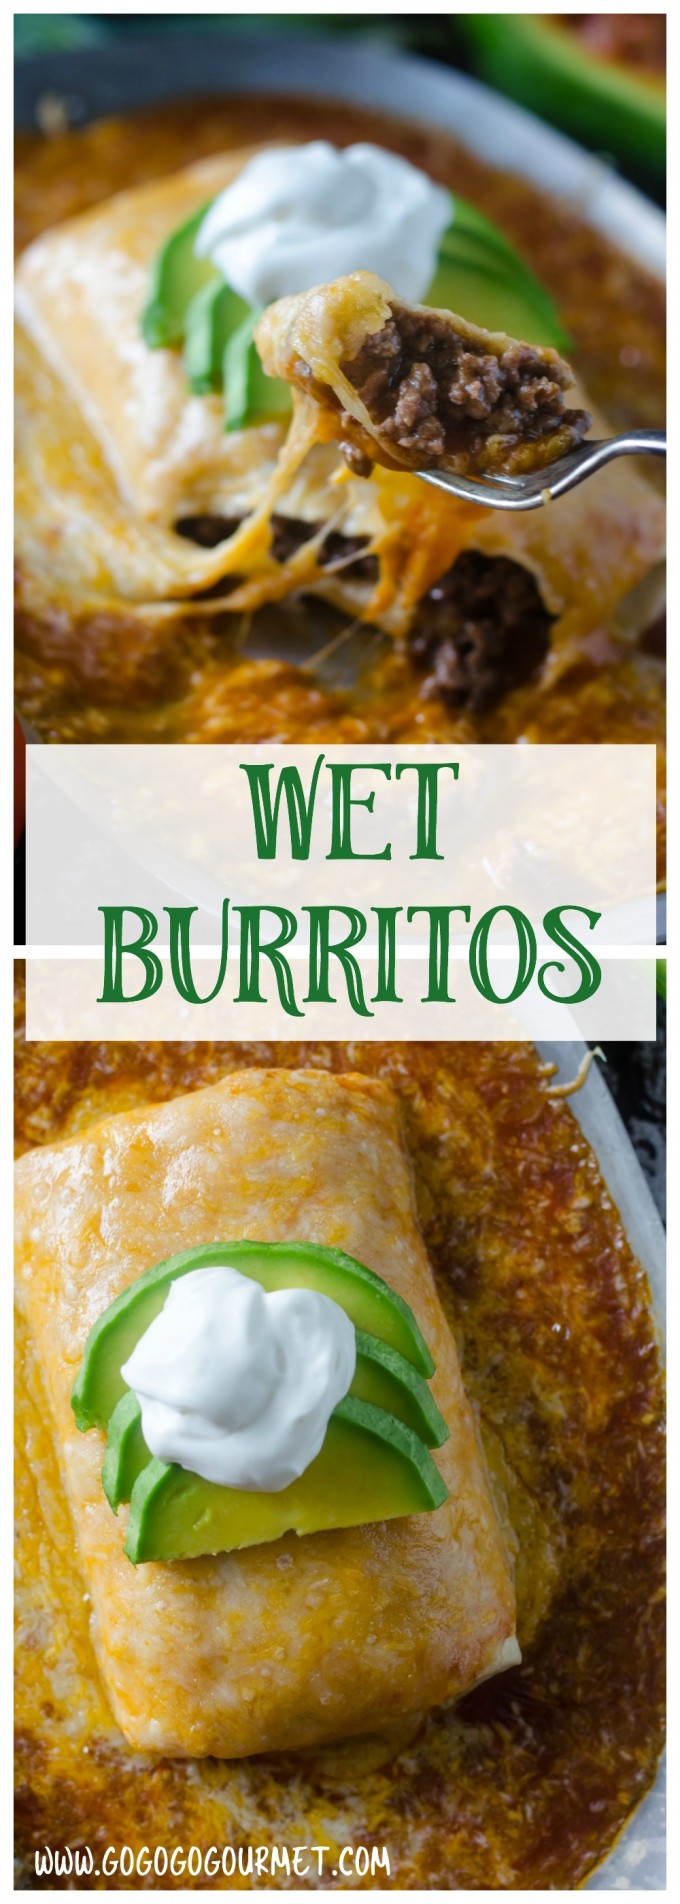 This Wet Burrito is smothered in a special sauce and tons of cheese! How can you go wrong? @gogogogourmet via @gogogogourmet